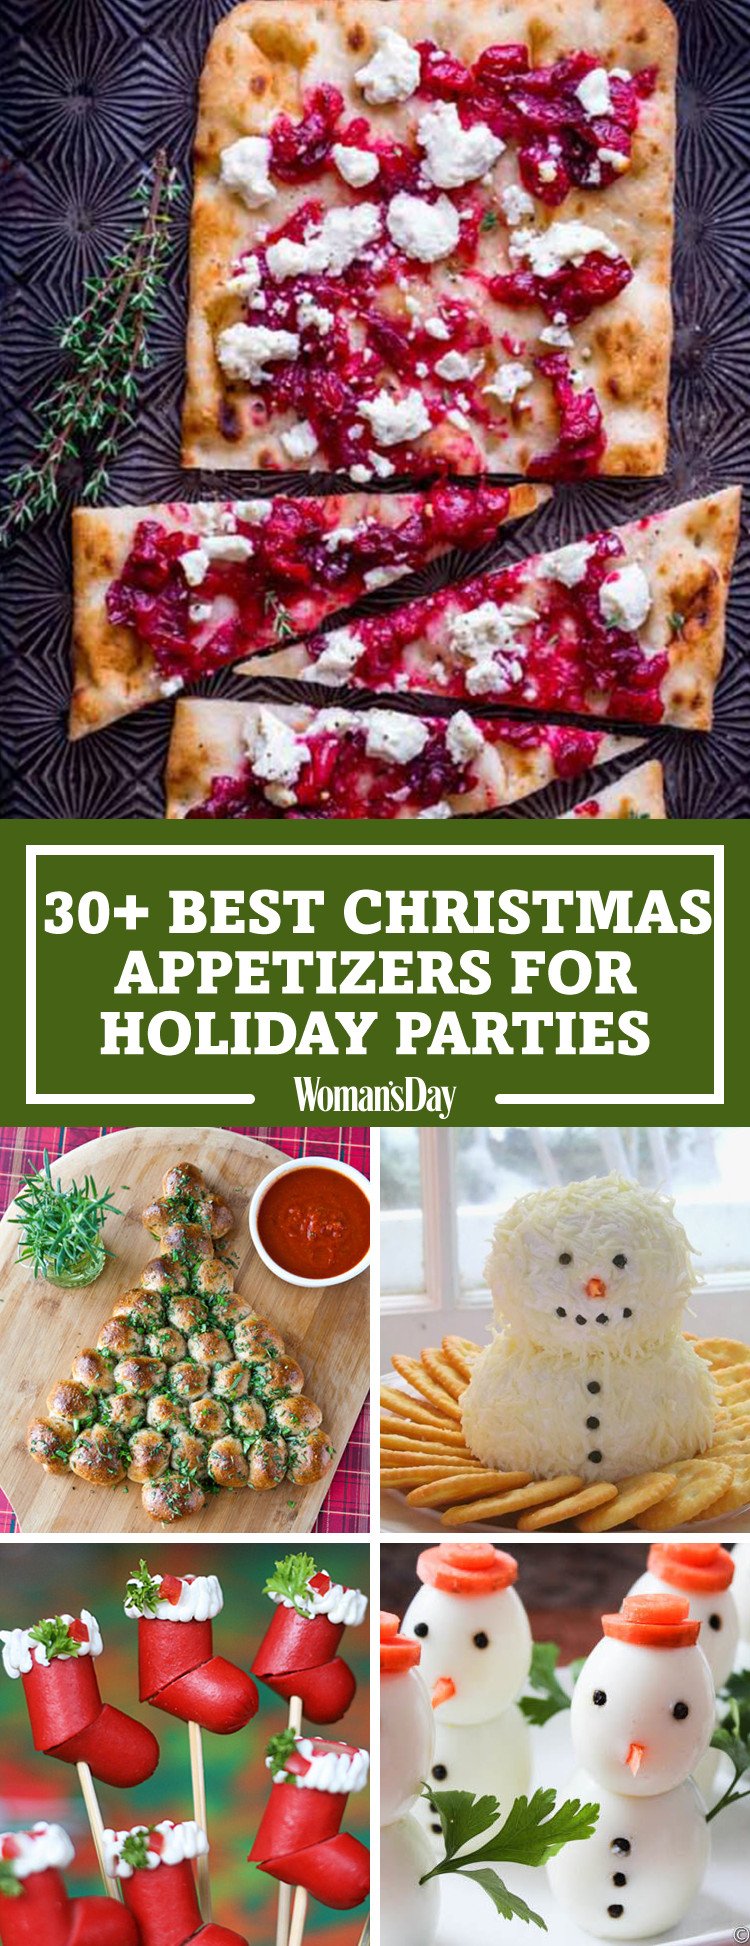 Best Christmas Party Appetizers
 30 Easy Christmas Party Appetizers Best Recipes for